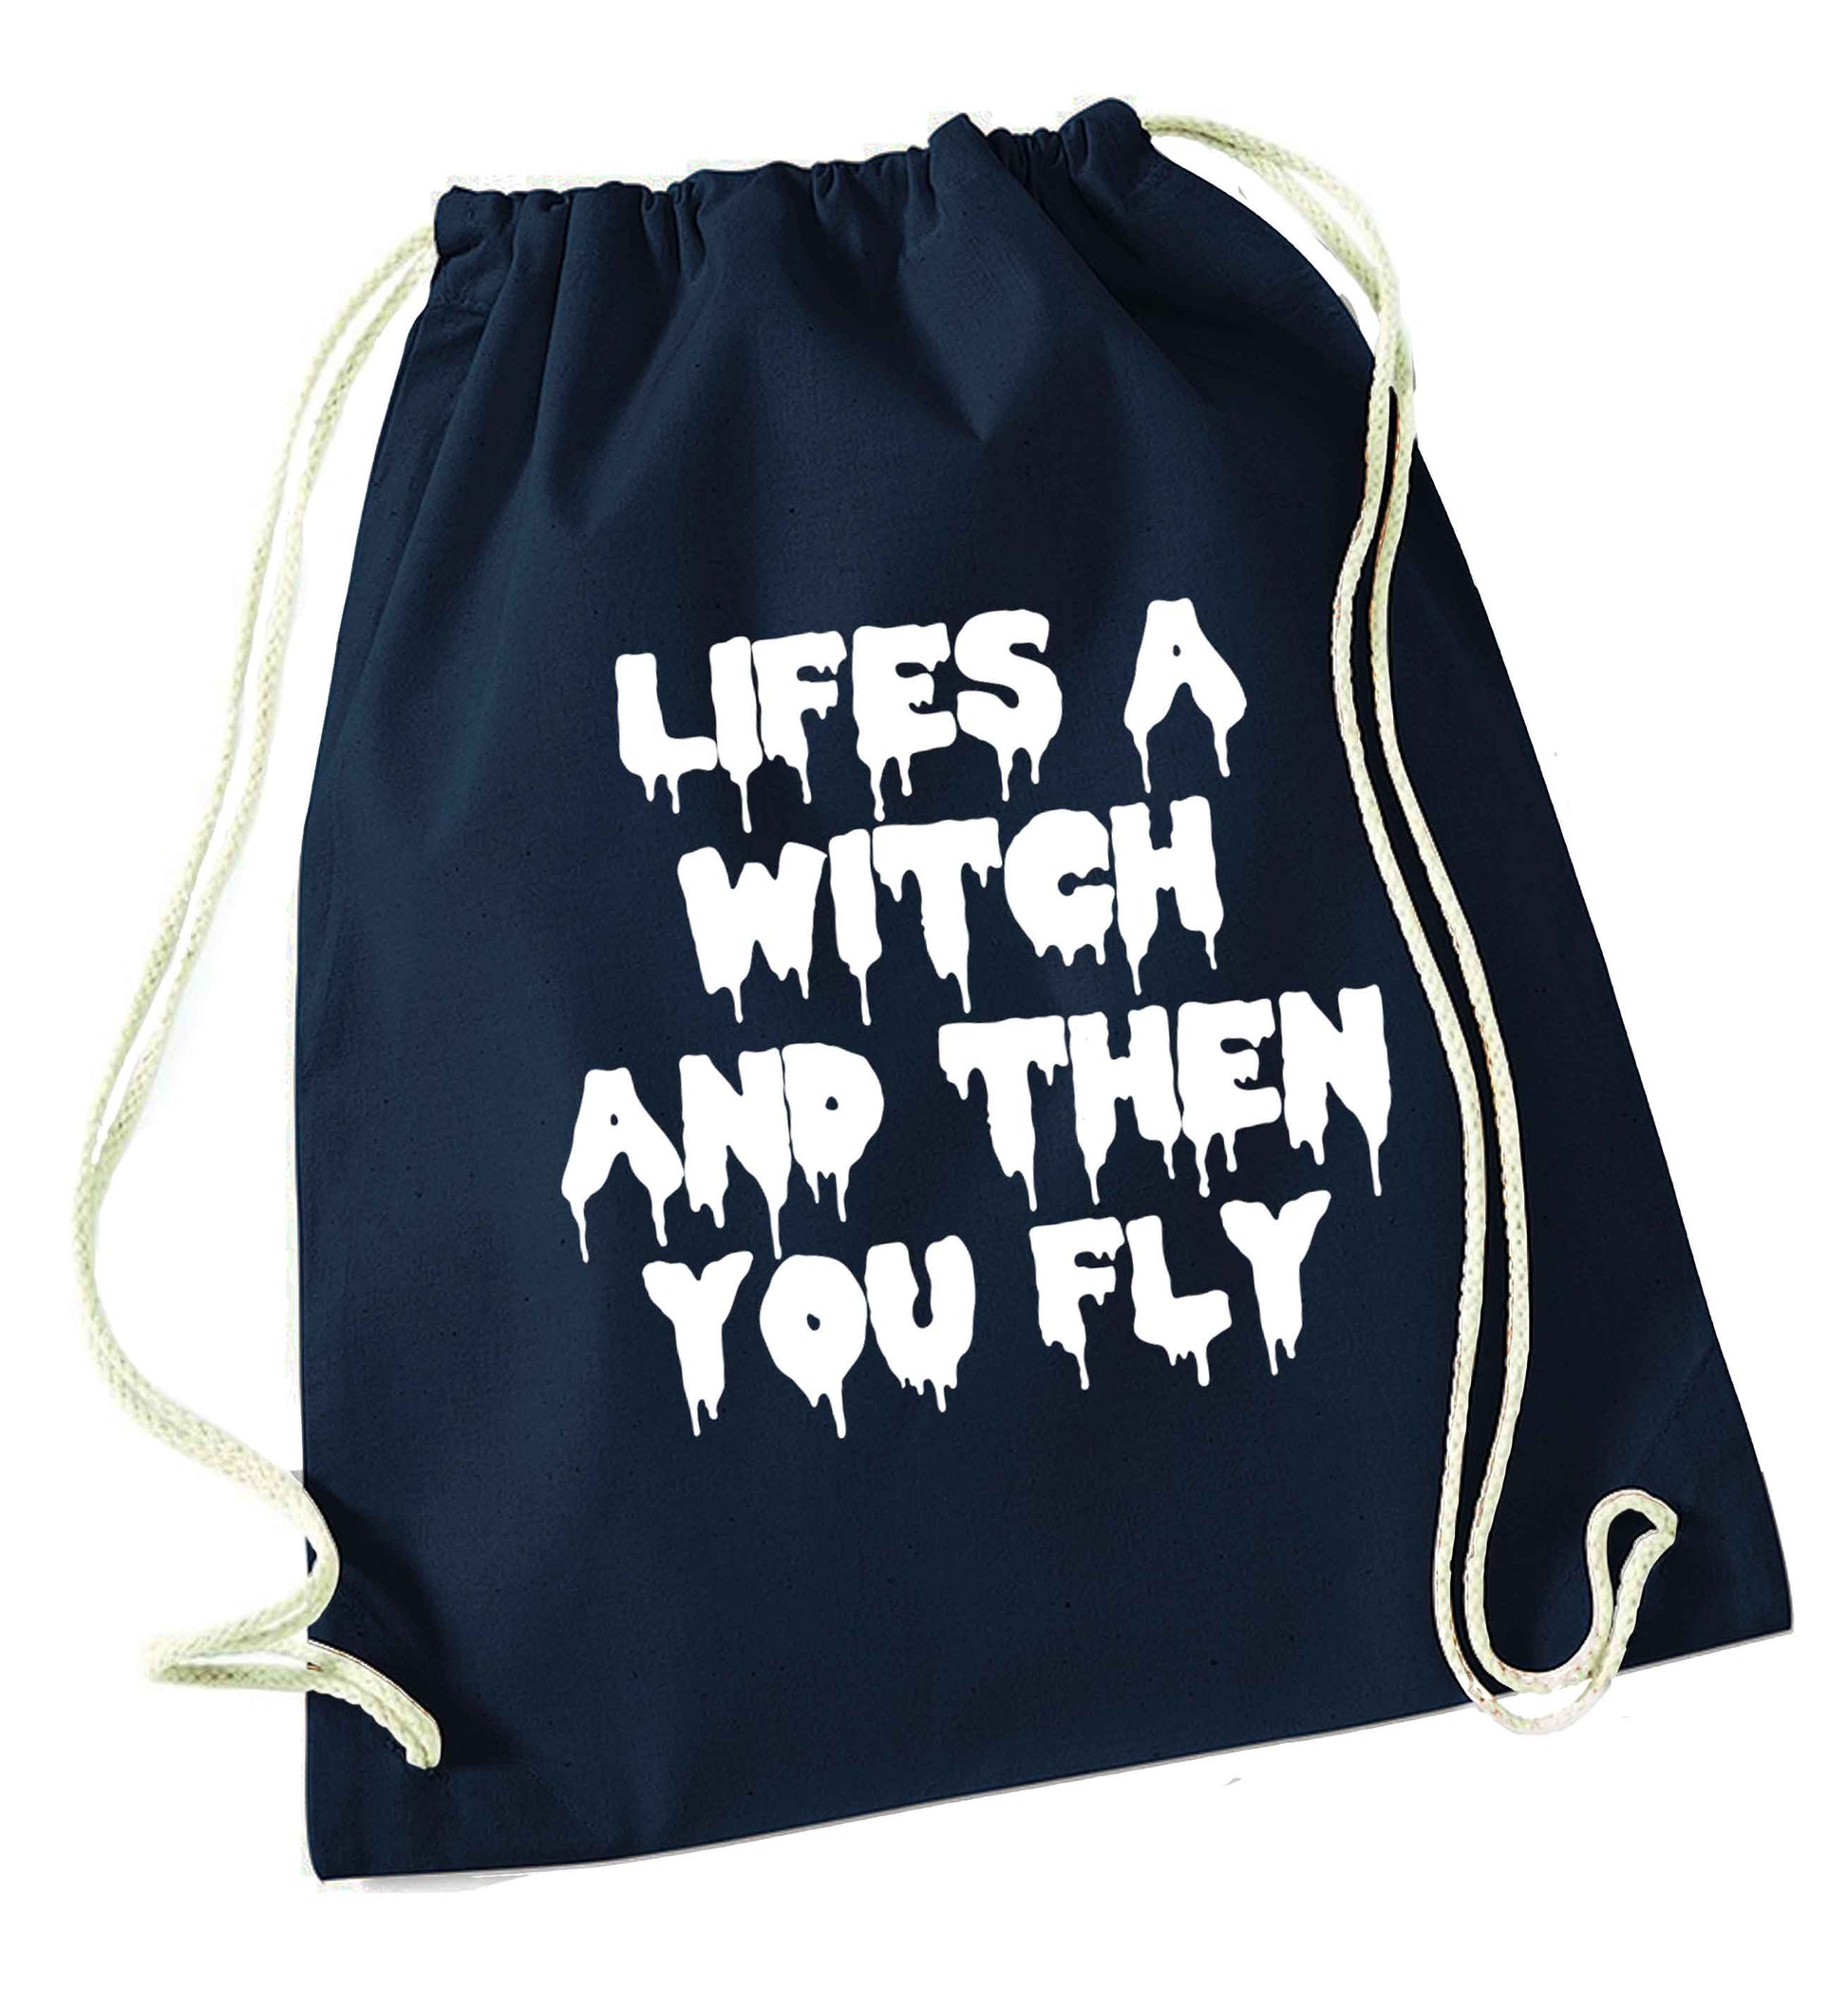 Life's a witch and then you fly navy drawstring bag